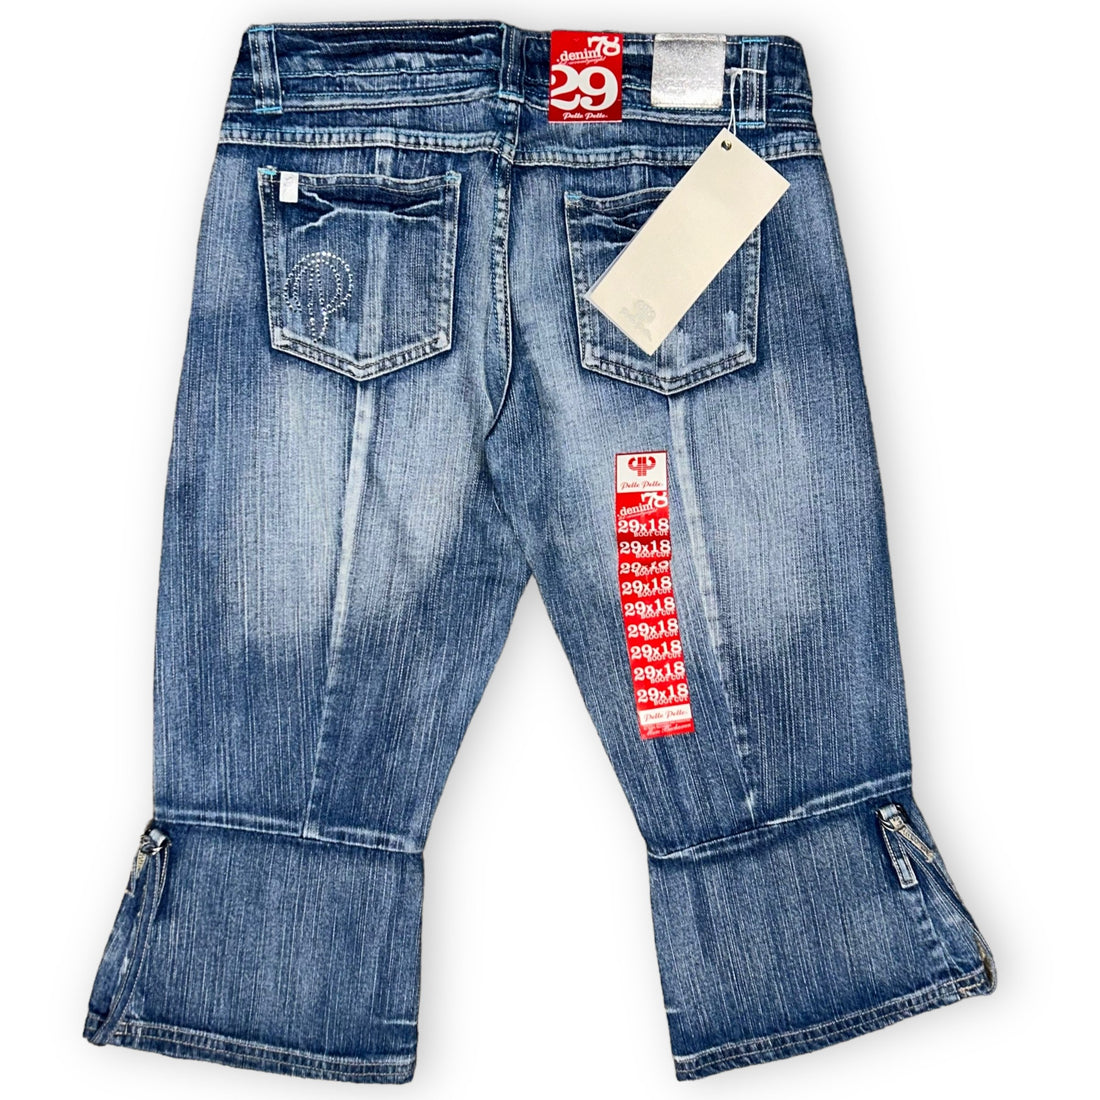 Jeans corti Pelle Pelle (31 USA S/M) - oldstyleclothing